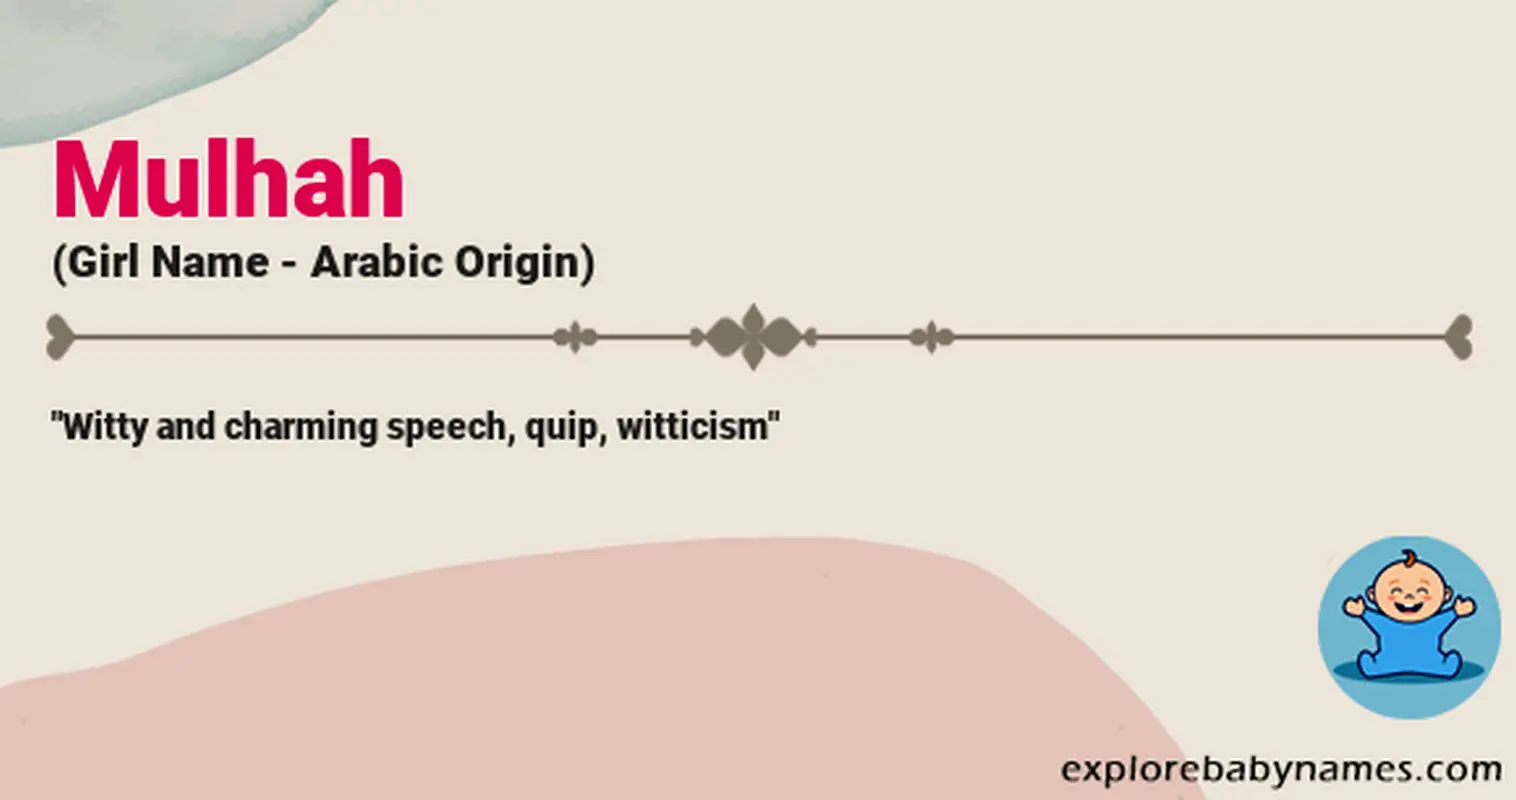 Meaning of Mulhah